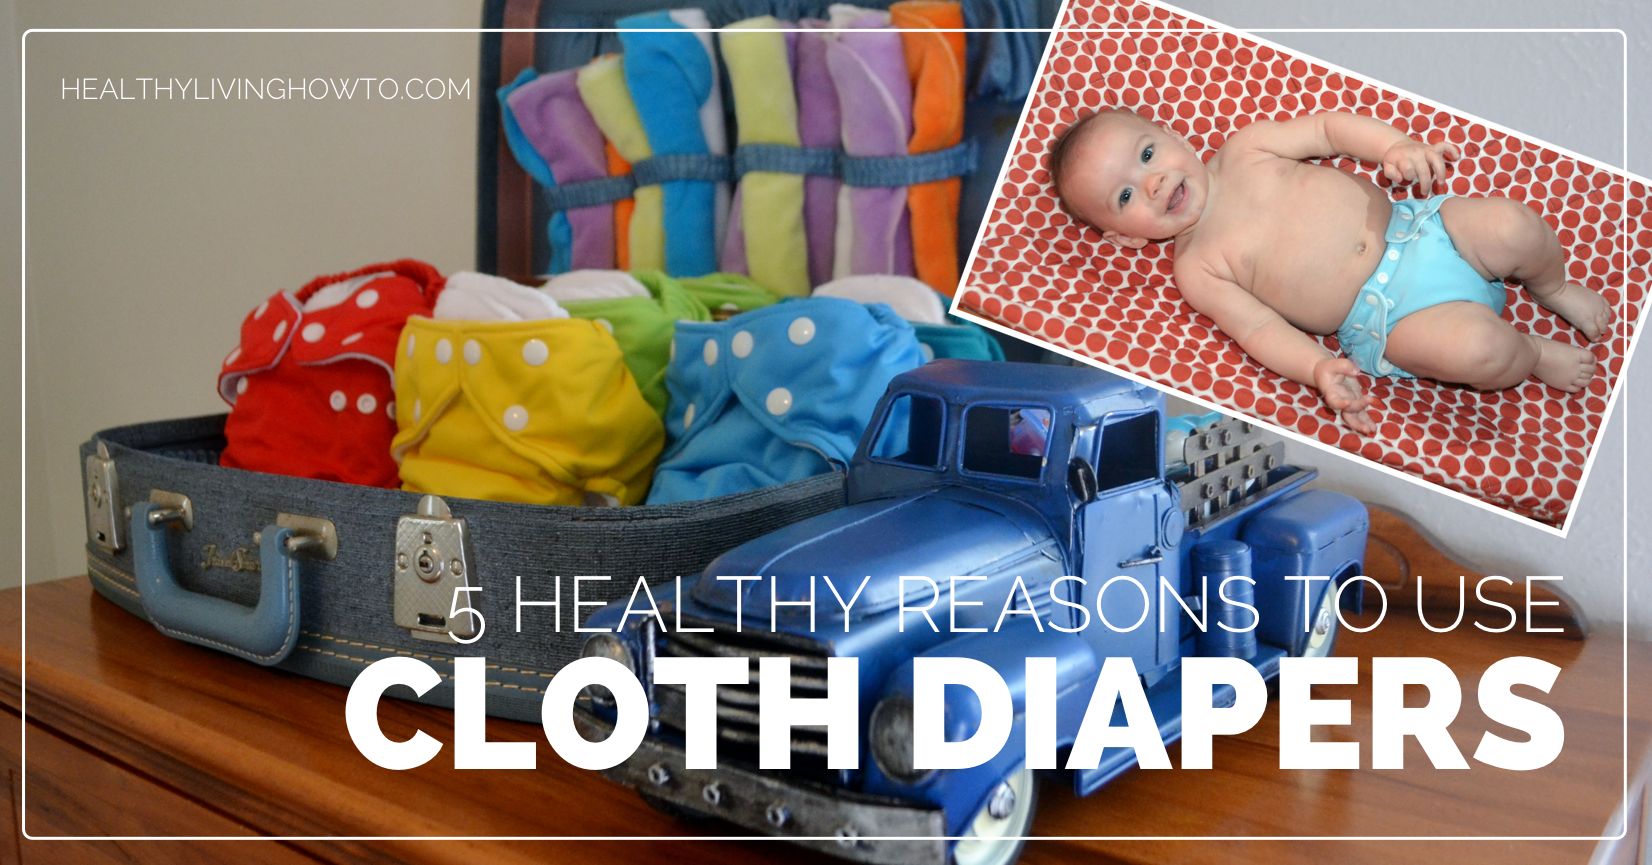 5-healthy-reasons-to-use-cloth-diapers-healthy-living-how-to